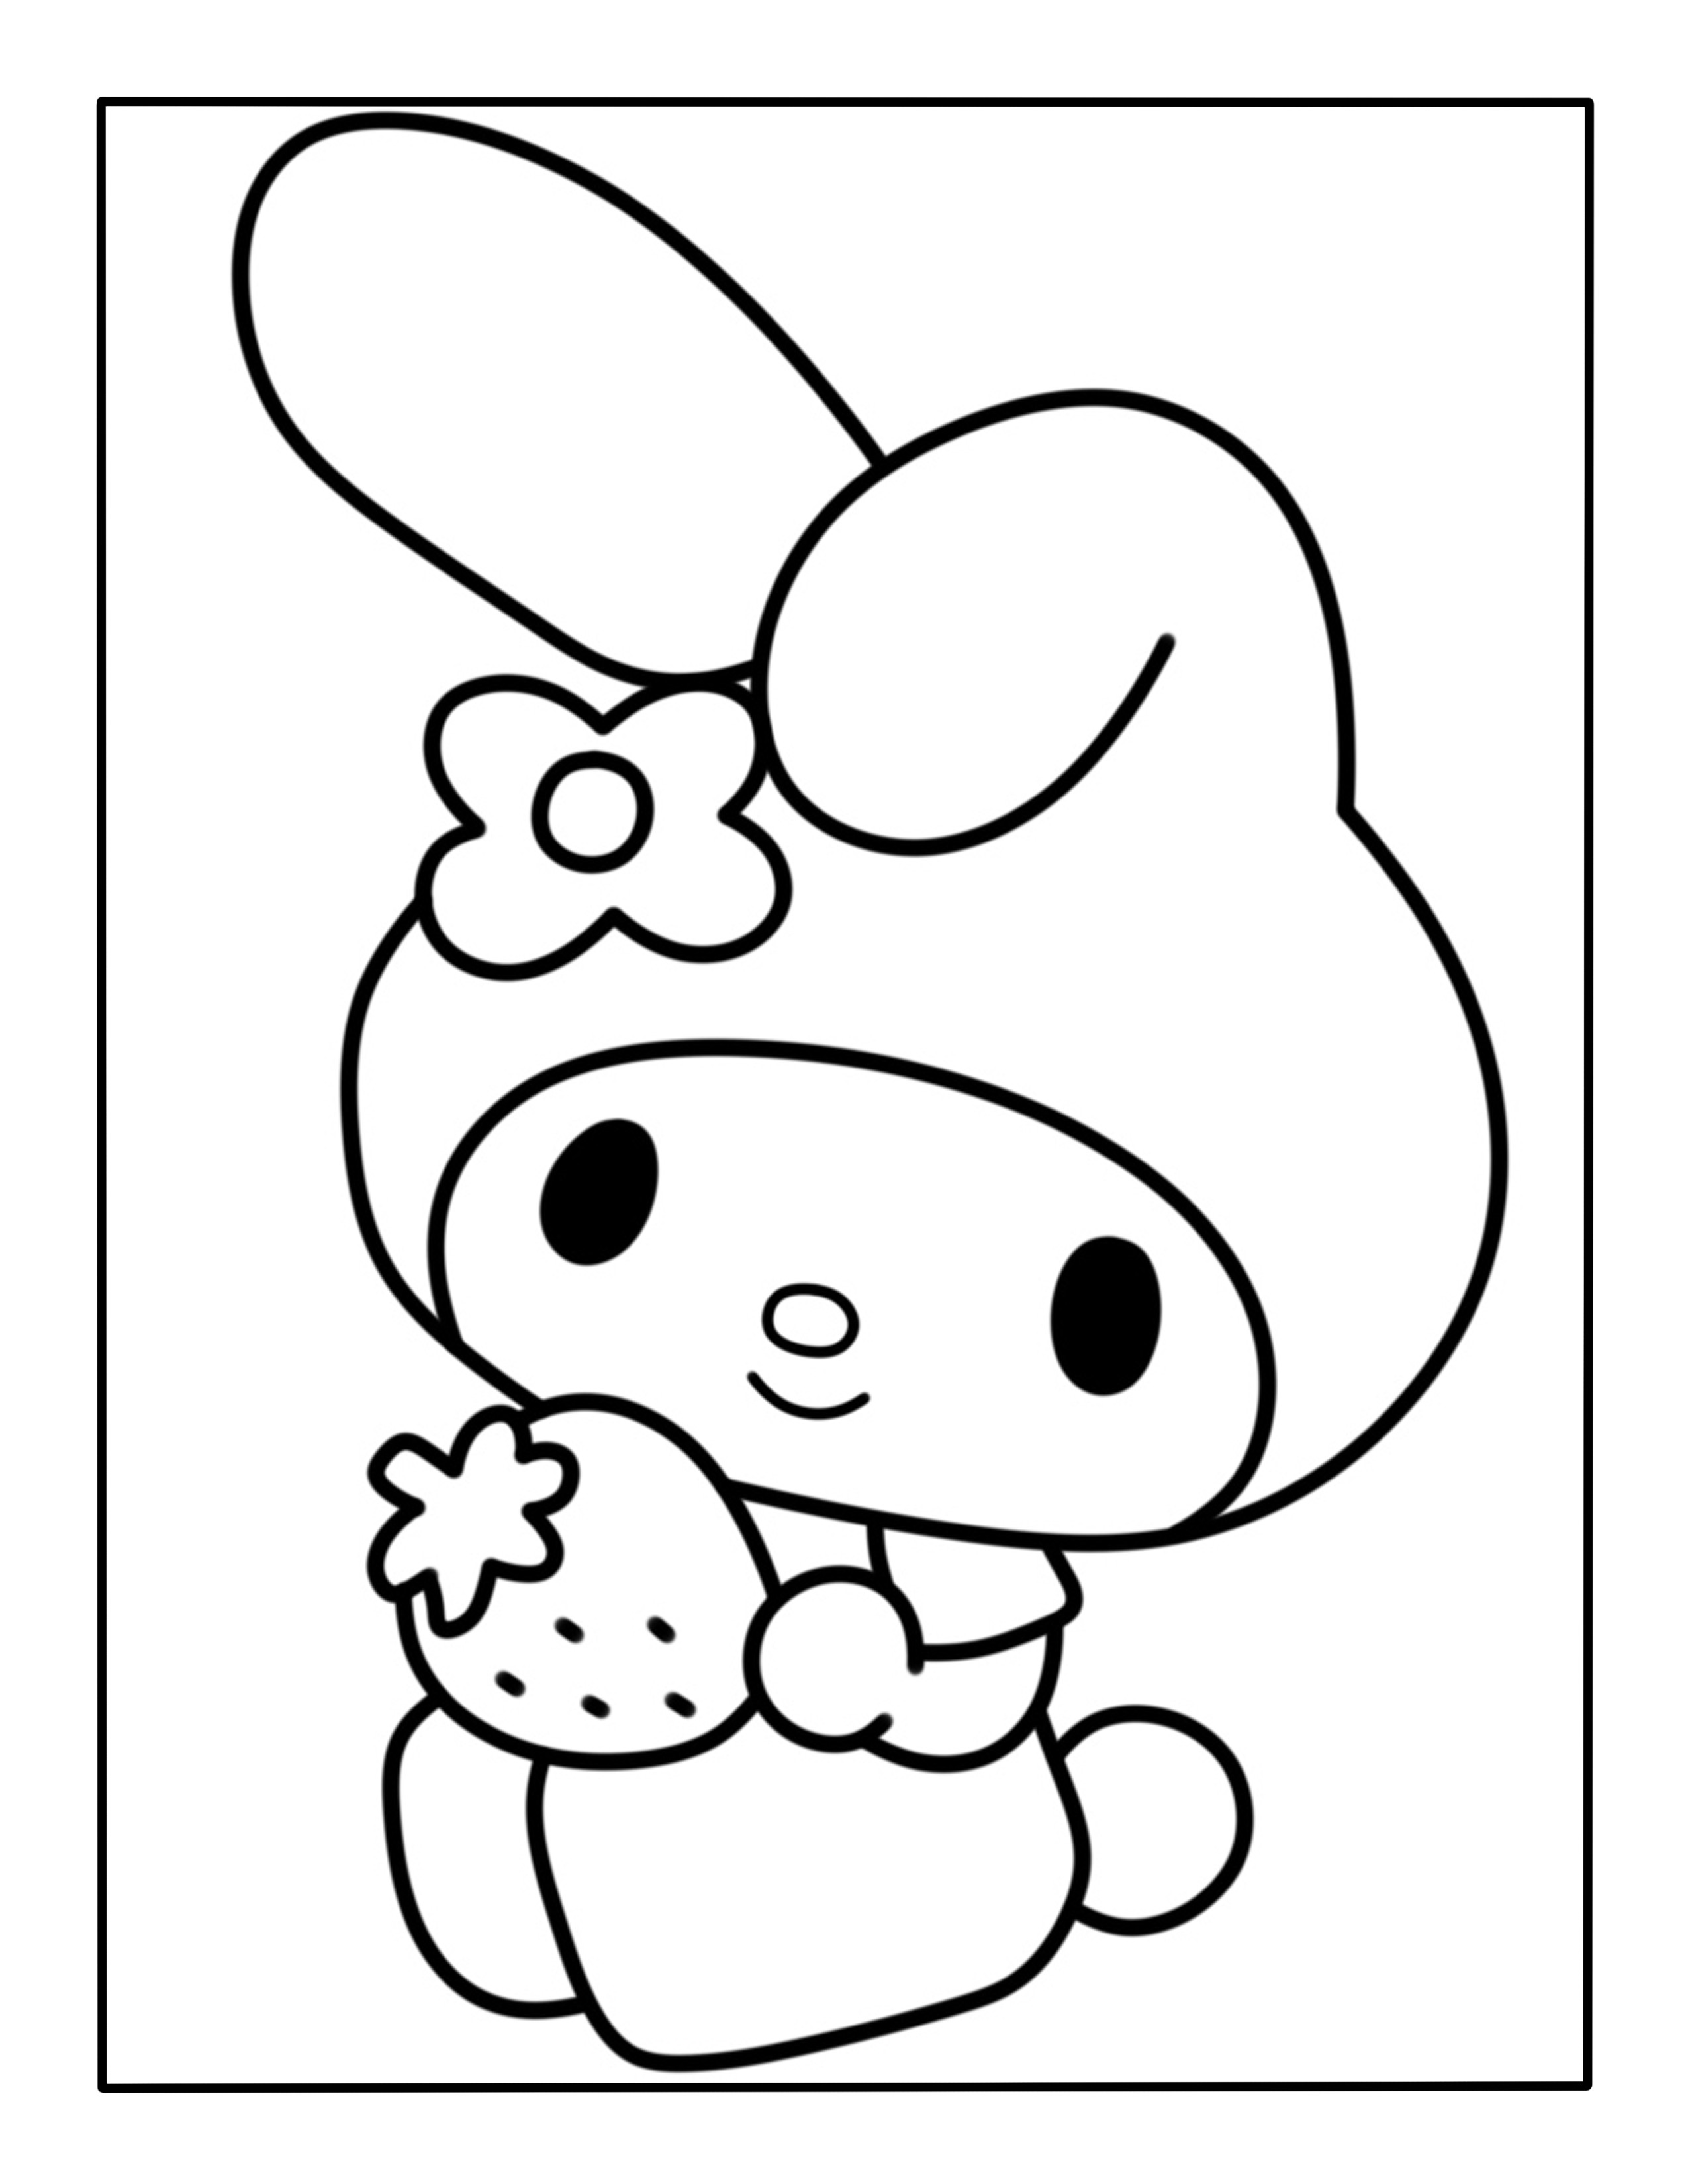 My melody coloring page â kimmi the clown